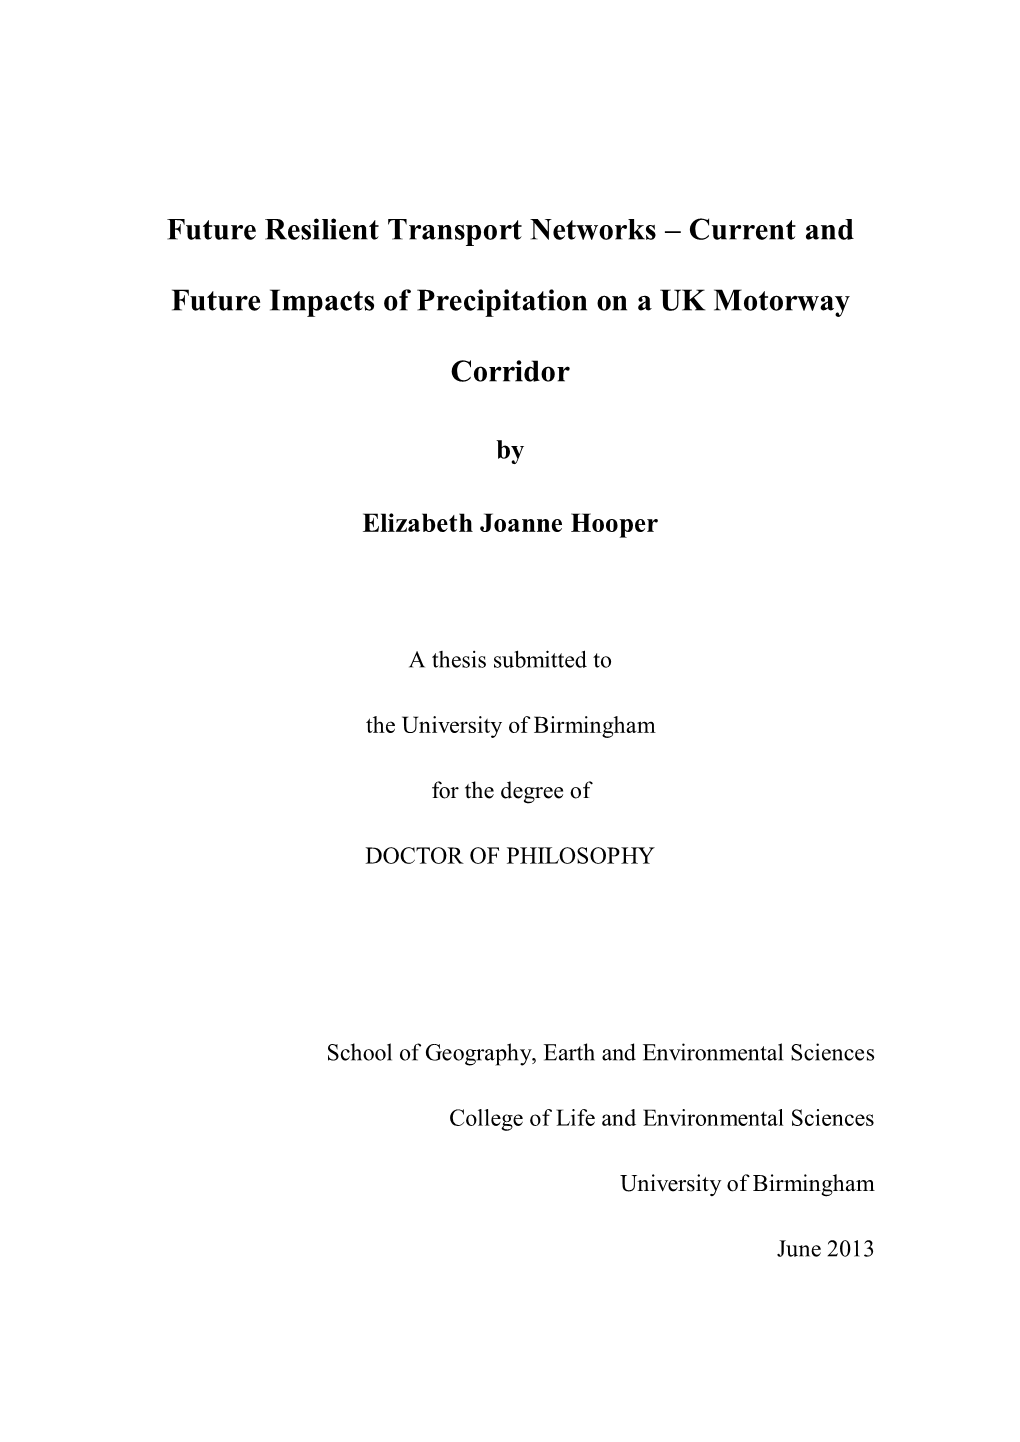 Current and Future Impacts of Precipitation on a UK Motorway